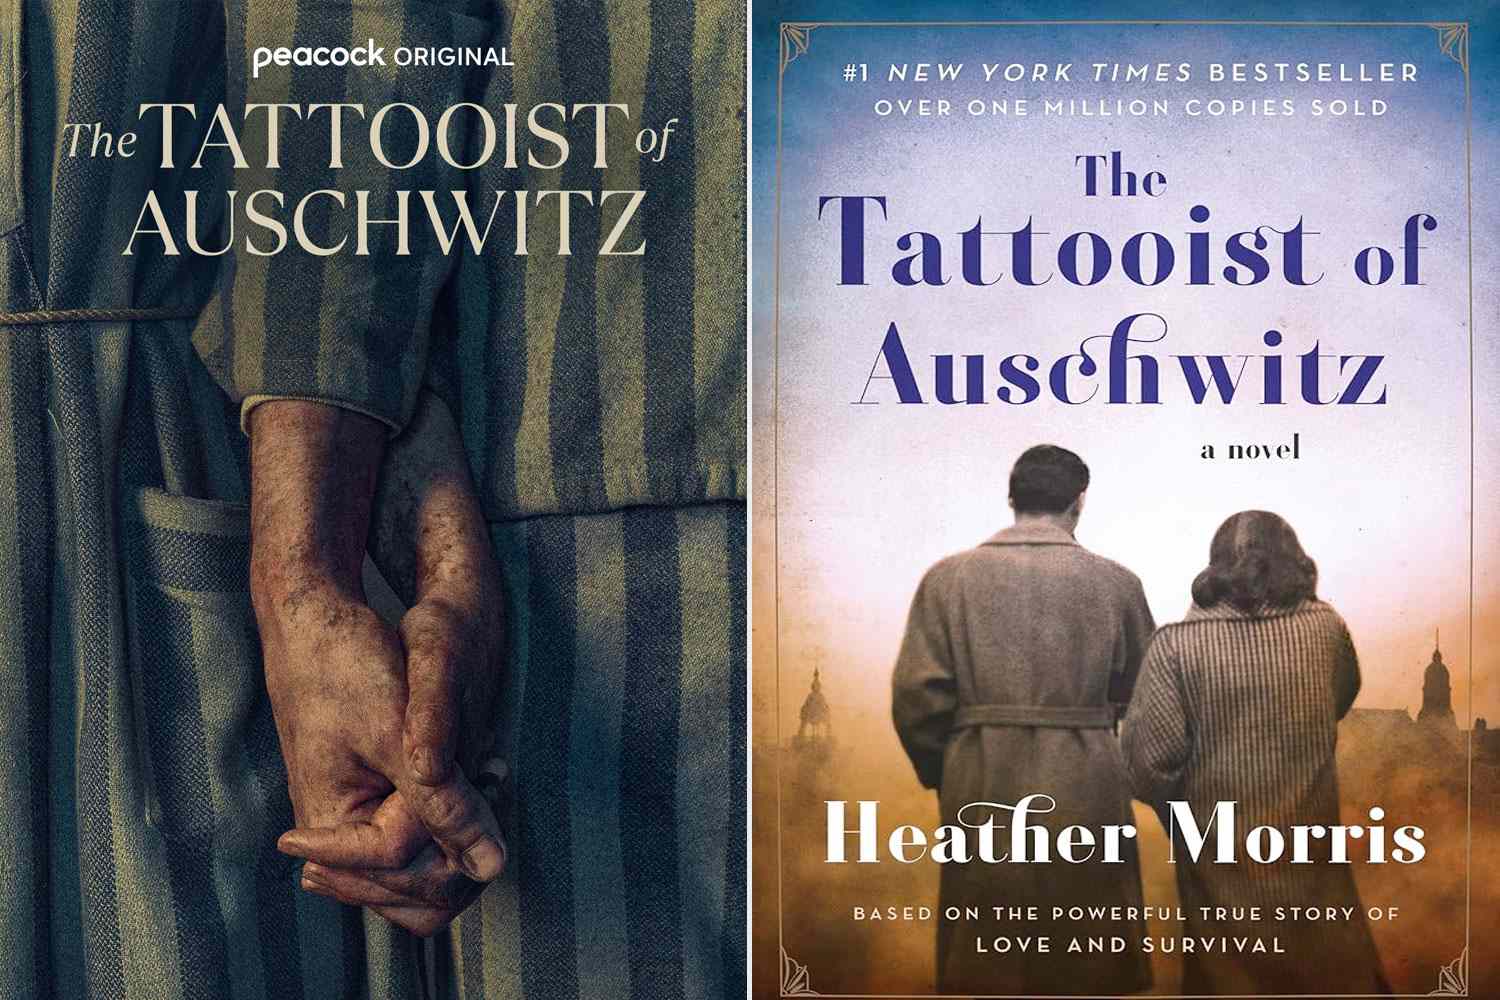 Let's Break Down the“Tattooist of Auschwitz” Book and TV Series: See the Differences